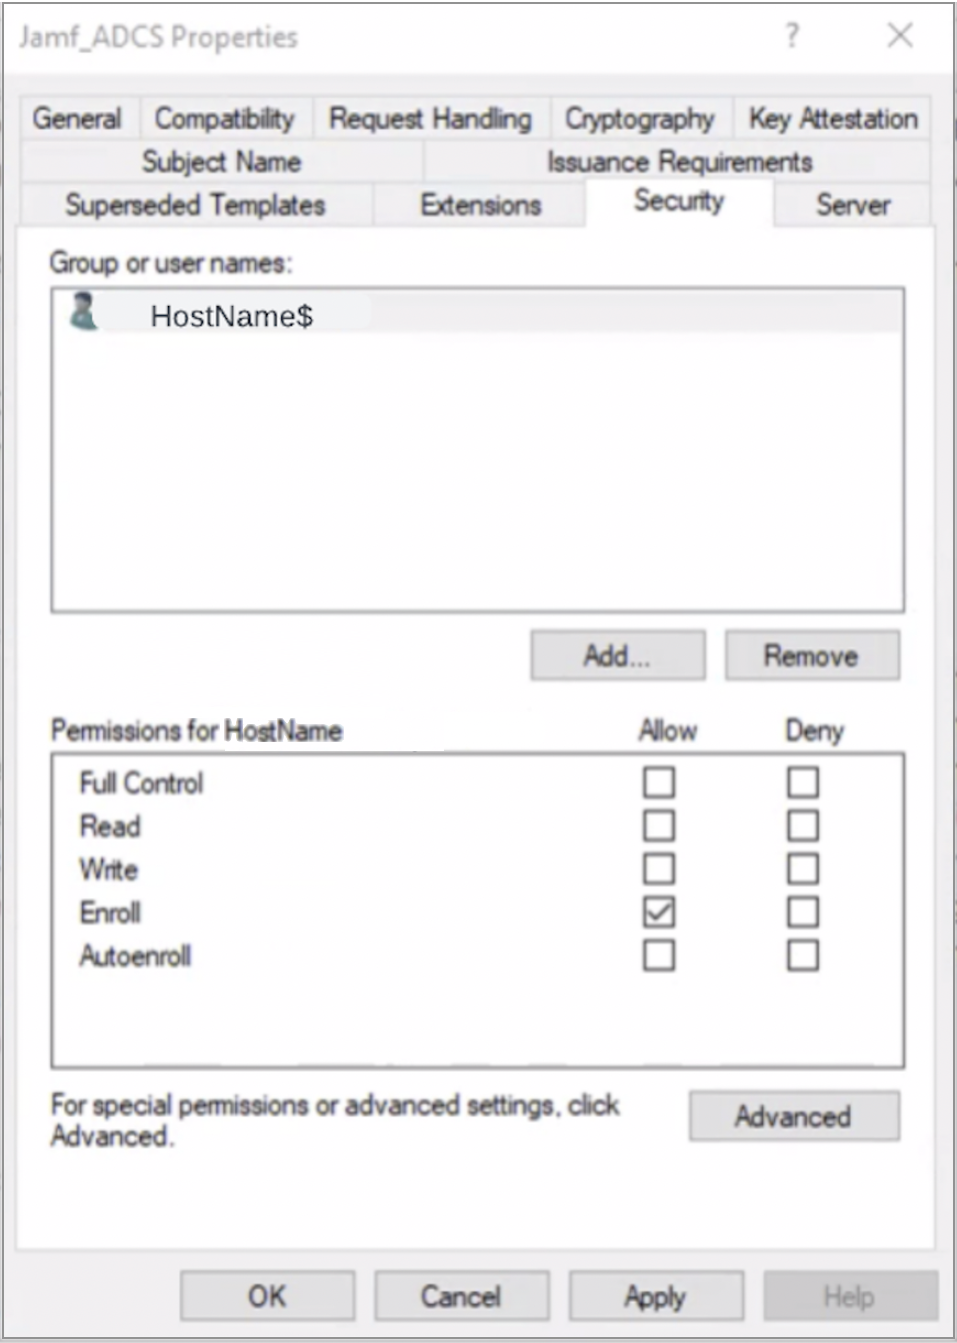 Configuring a Template and Permissions in AD CS Integrating with